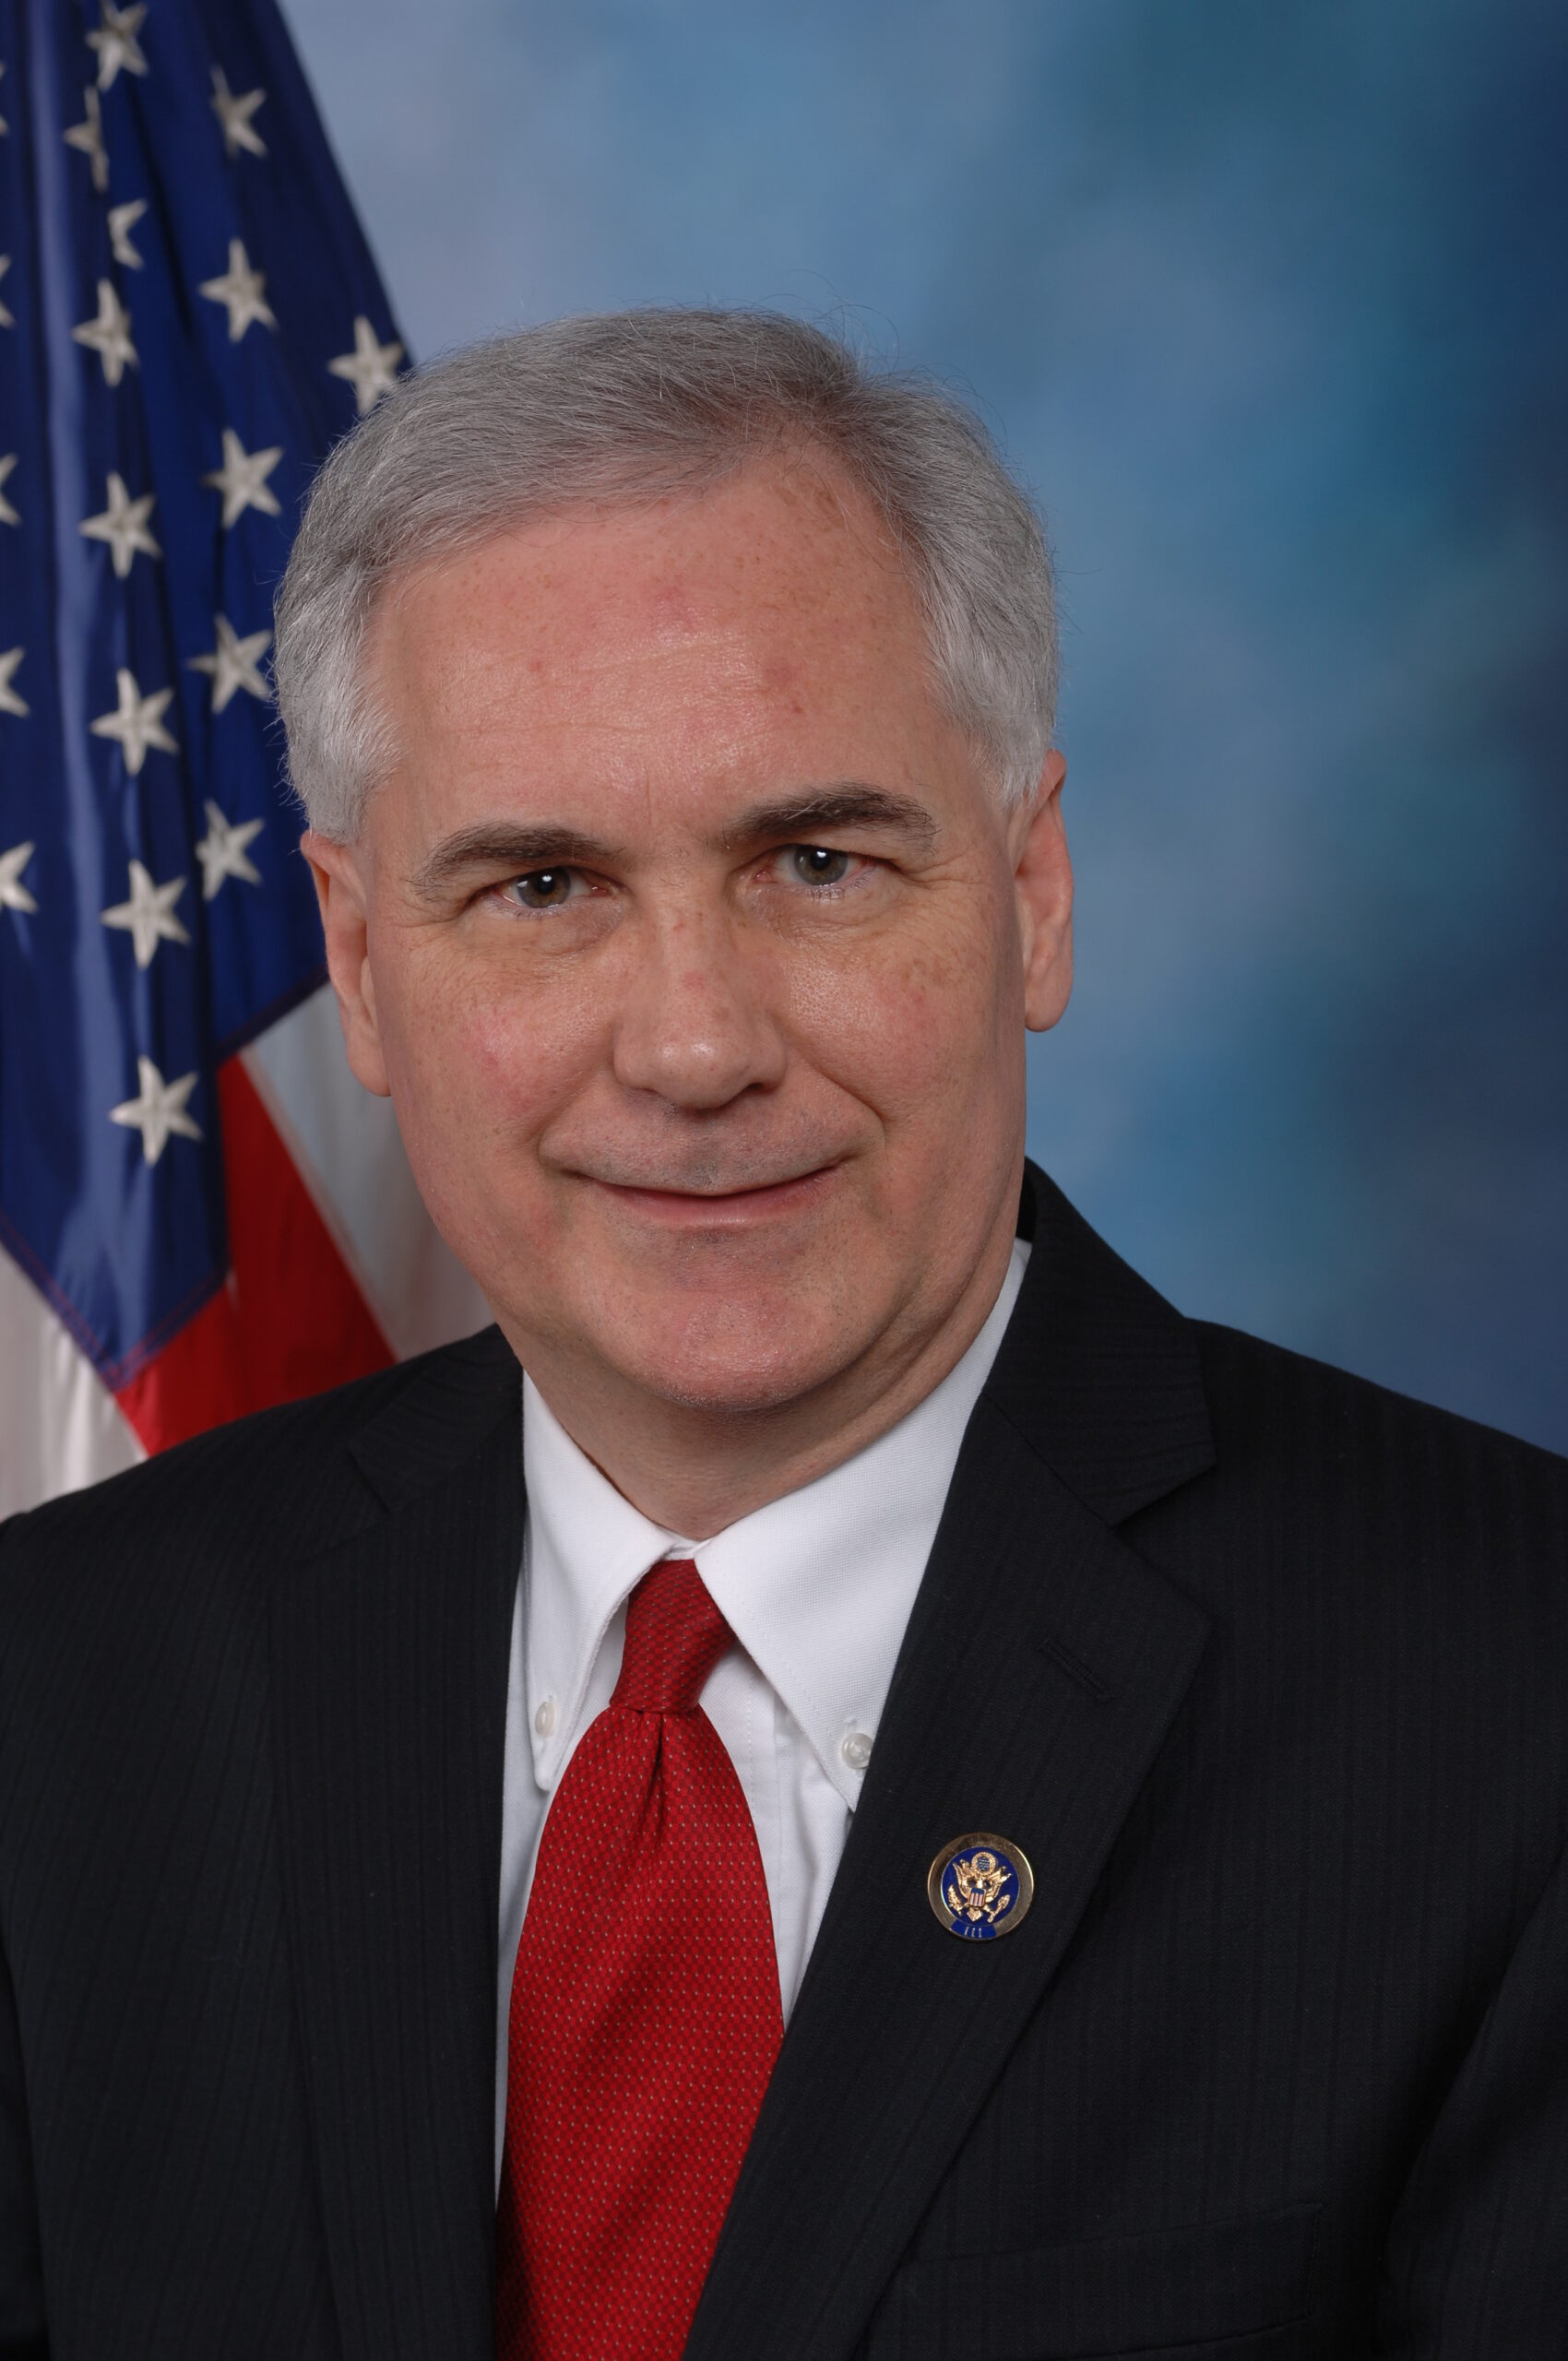 McClintock Introduced House Resolution With Over 160 Co-sponsors in Support of a Free, Democratic, and Secular Republic in Iran